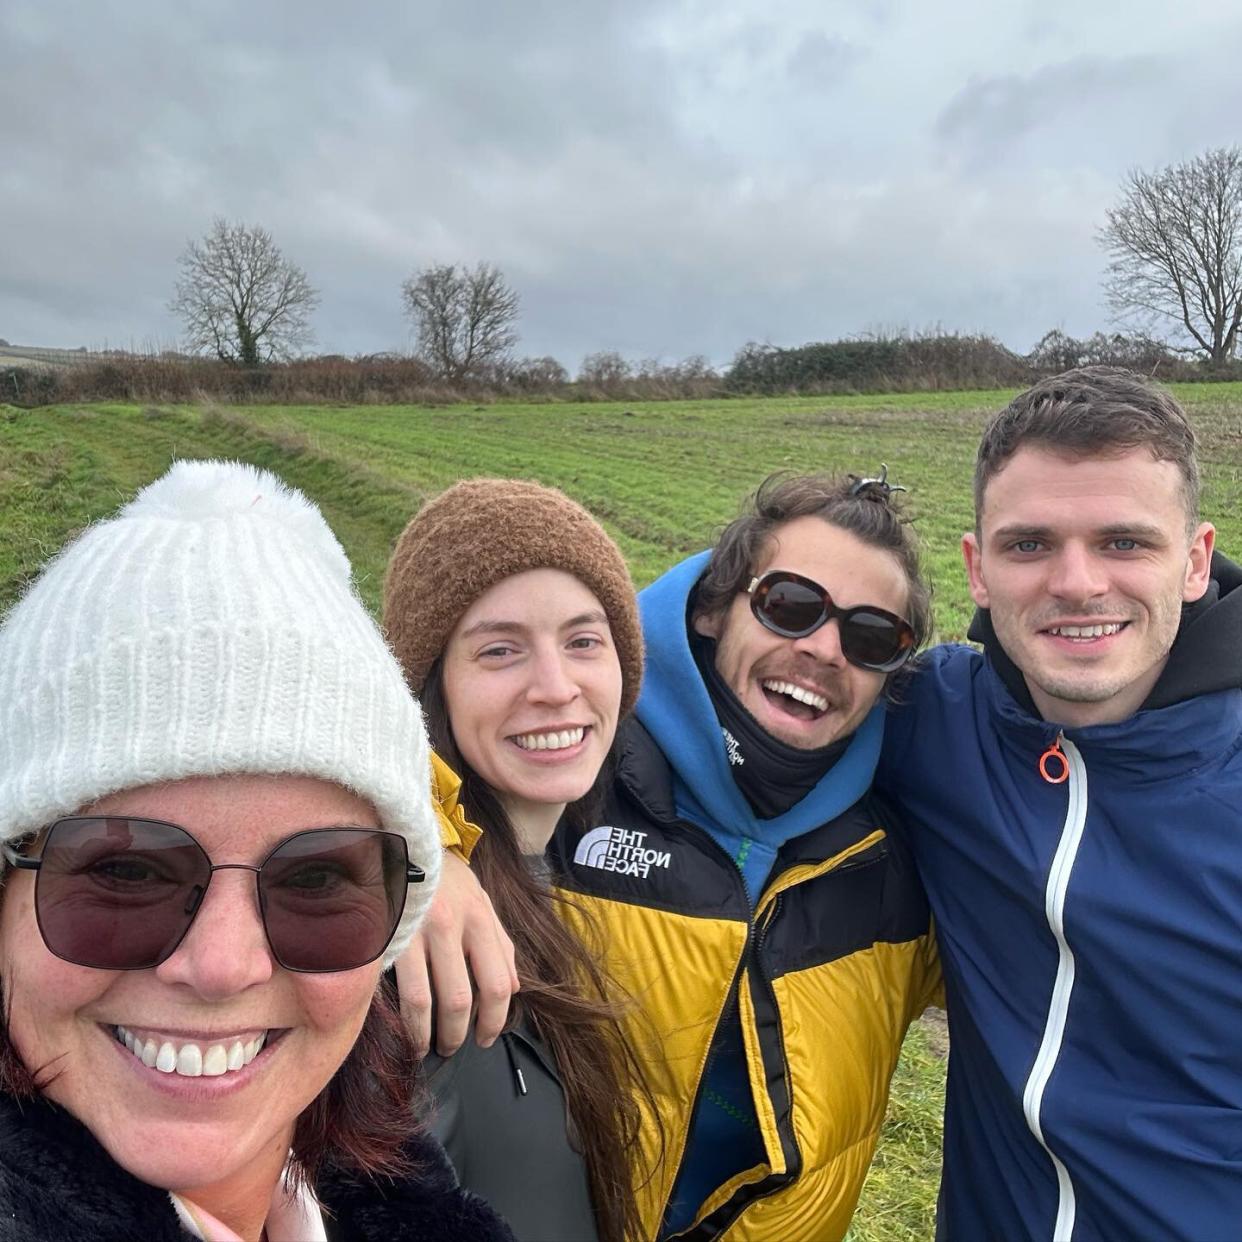 Harry Styles Spends Christmas with His Mom, Sister and Sister’s BF in England